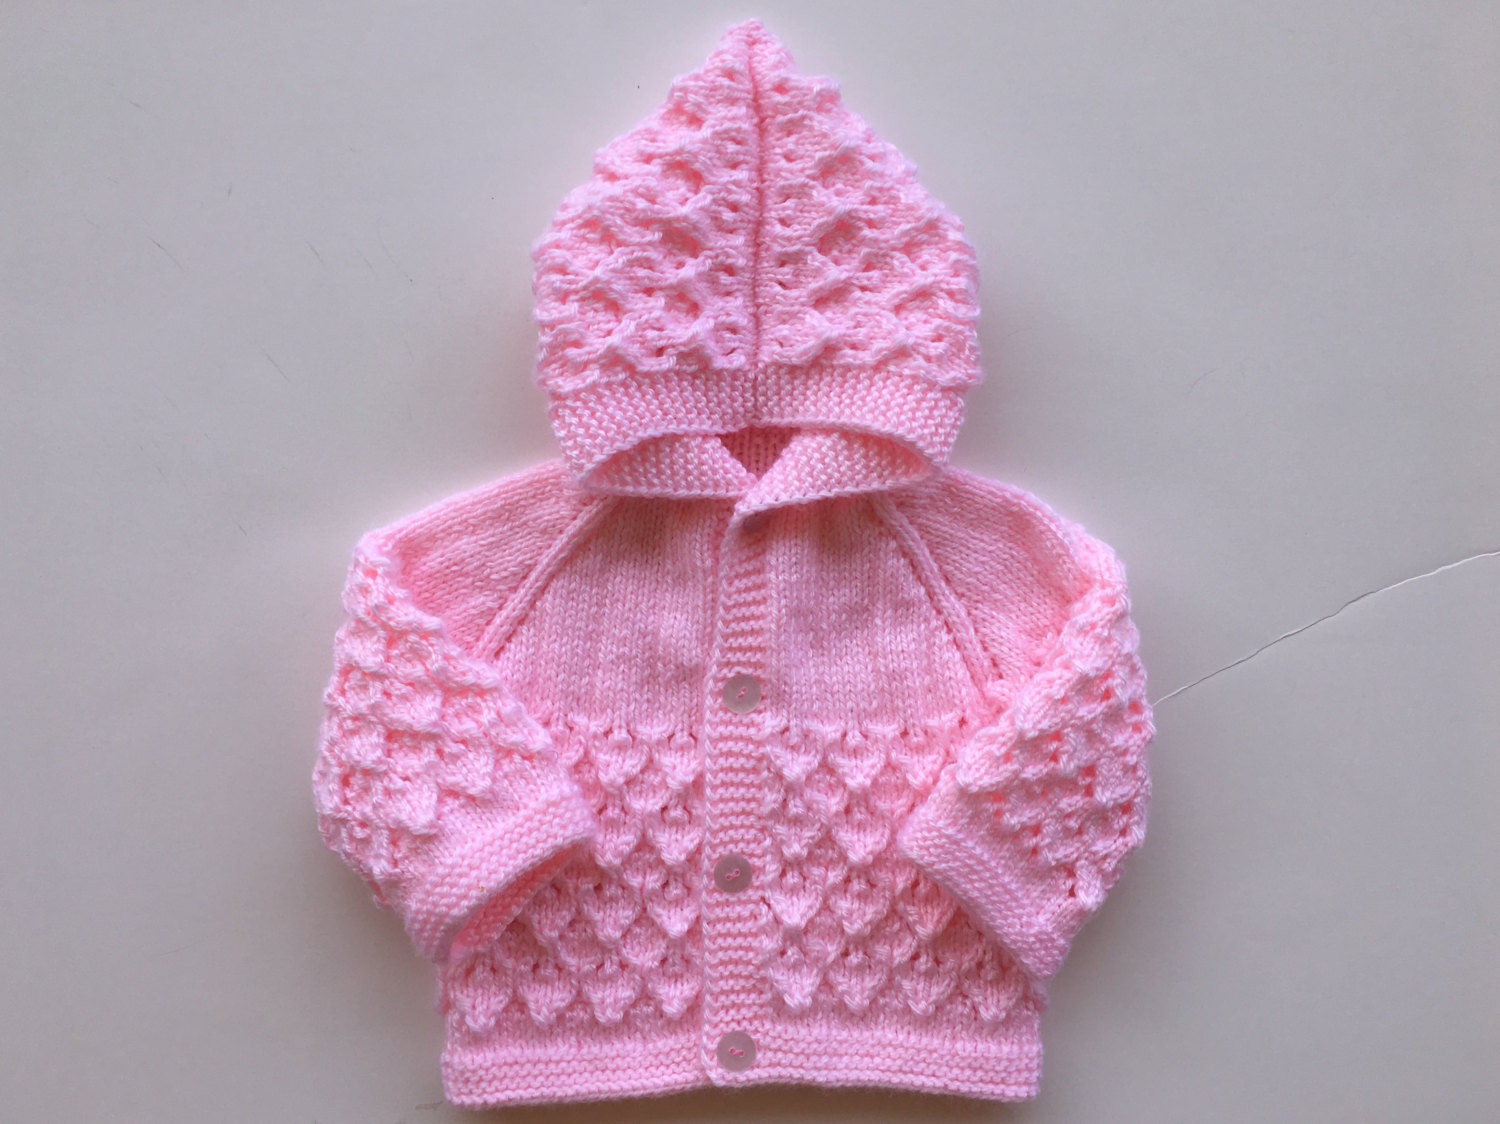 Hand Knitted for New Born Girl Sweater-hoodies 3-6 Months Old. Pale ...